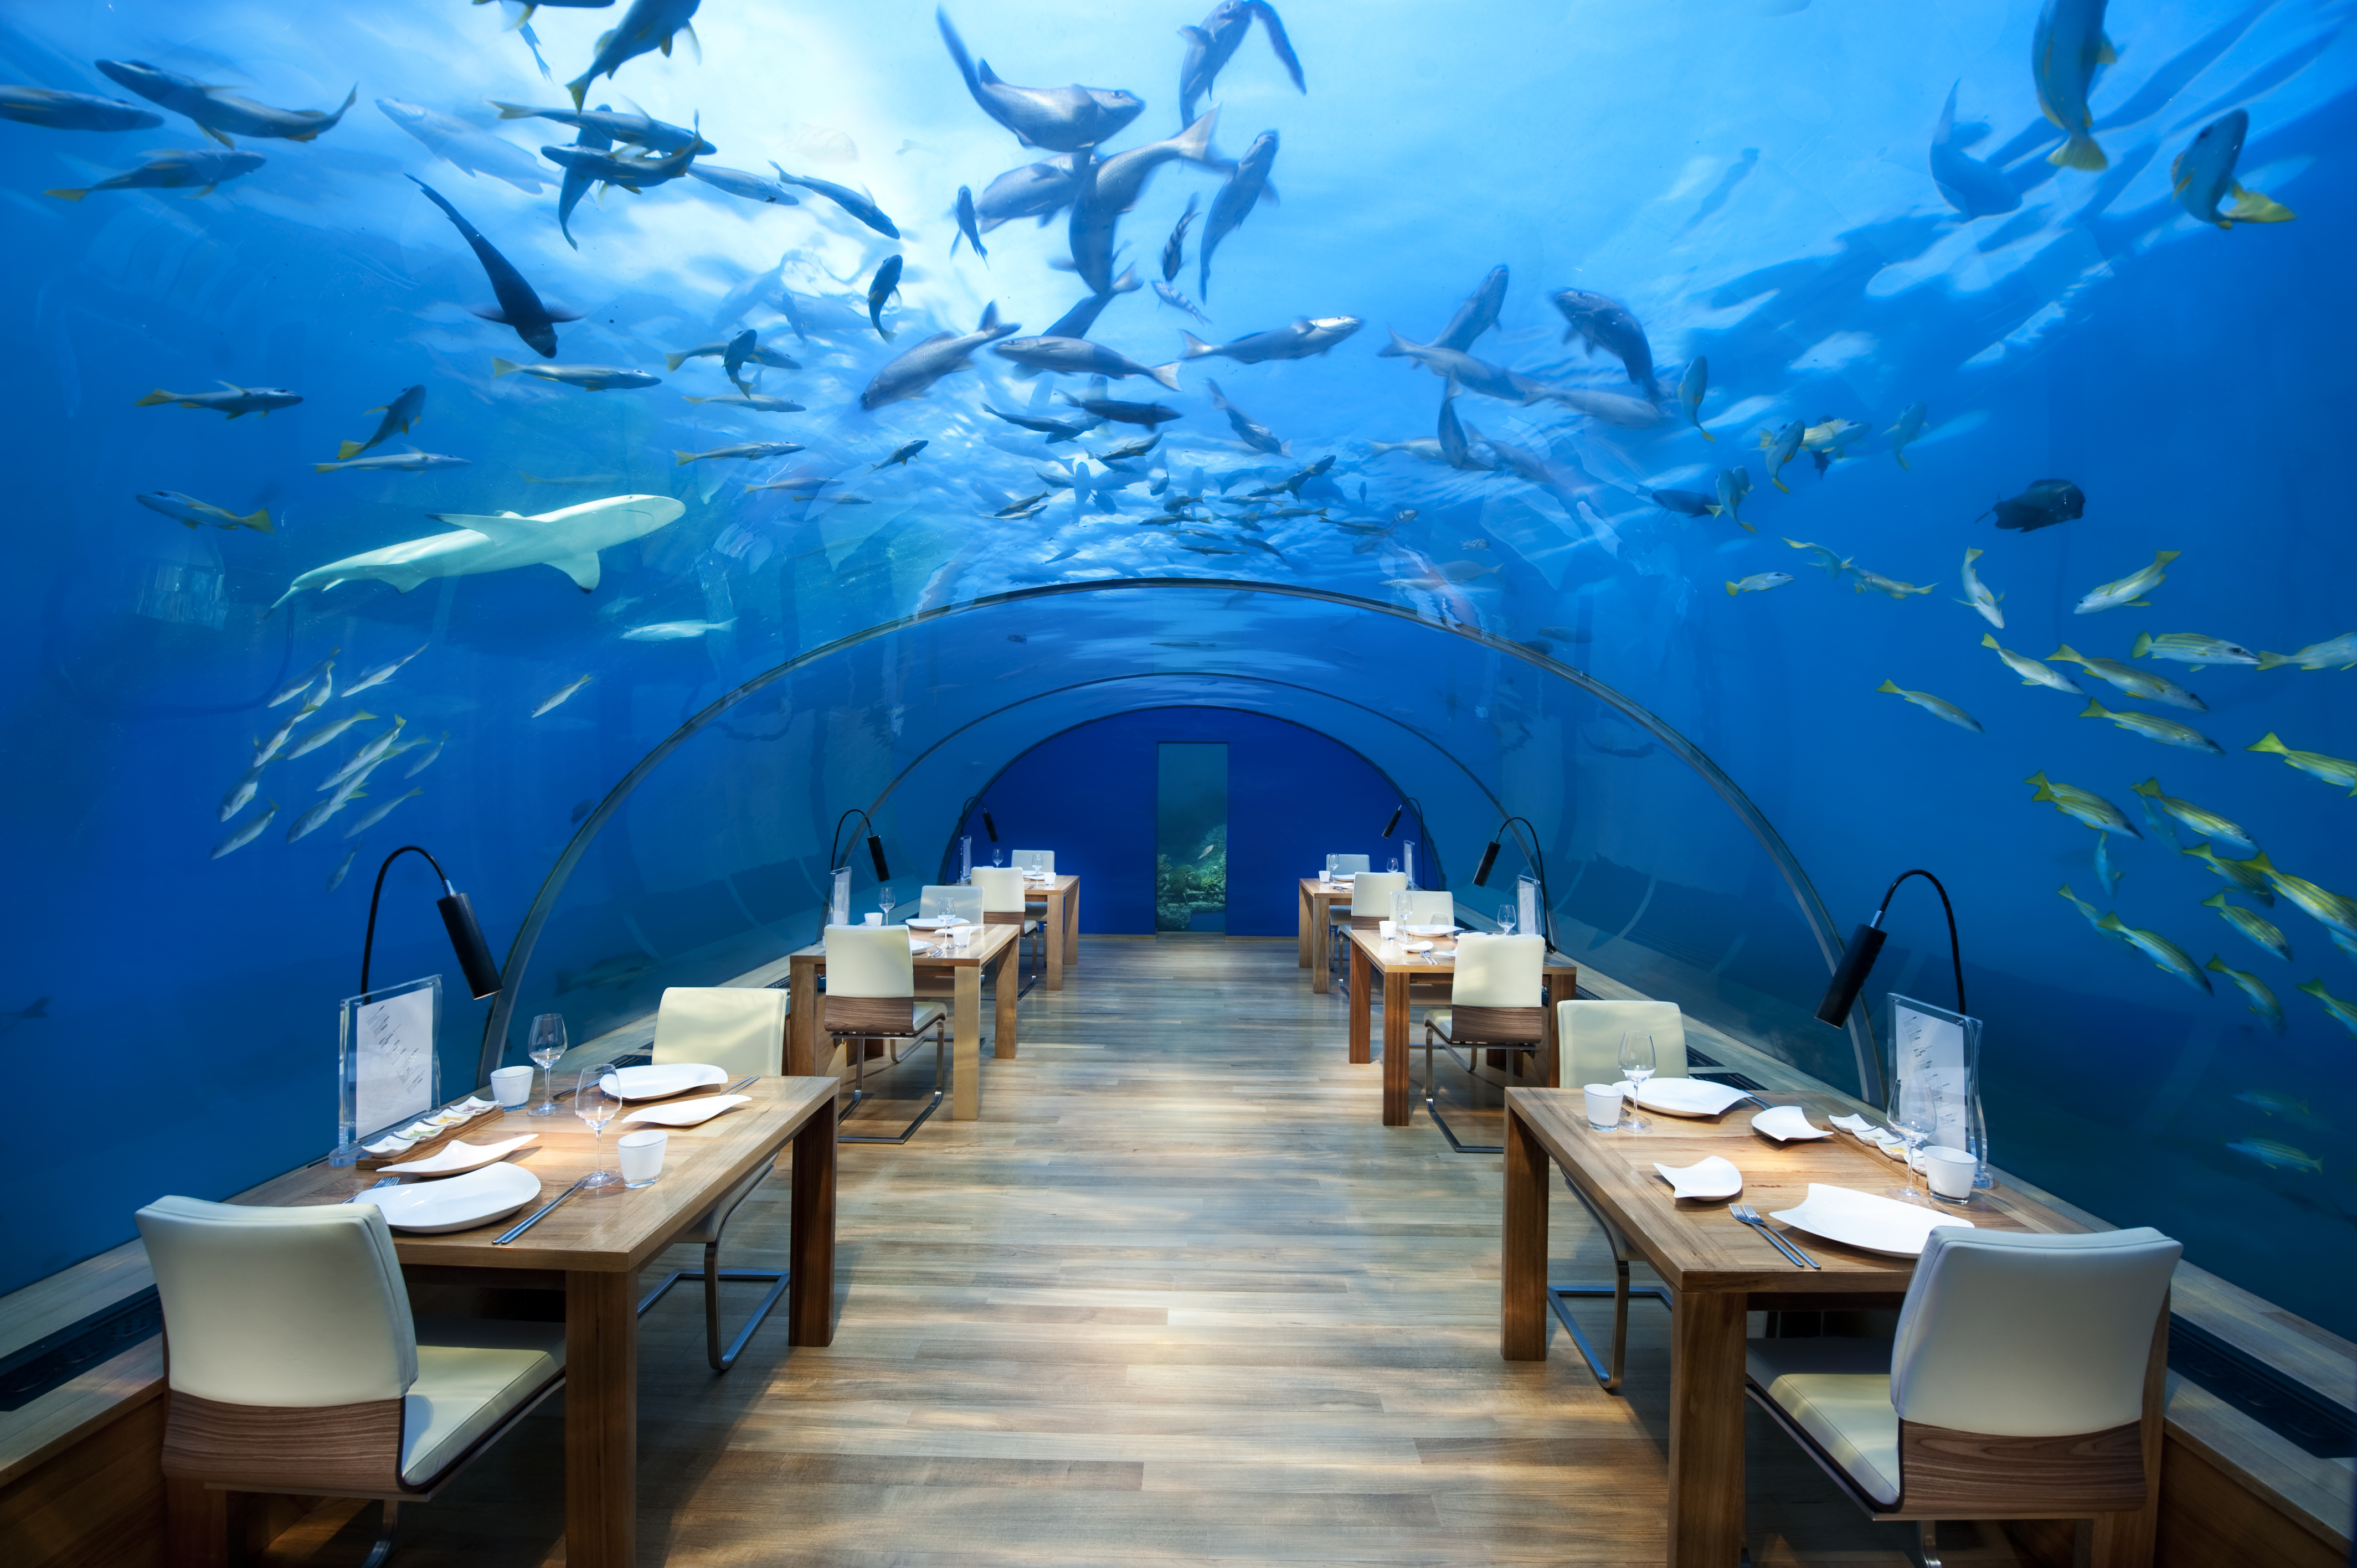 transparency, Underwater, Restaurant, Chair, Table, Sea, Fish, Glass, Lamp, Arch, Wooden surface, Dishes, Maldives, Shark Wallpaper